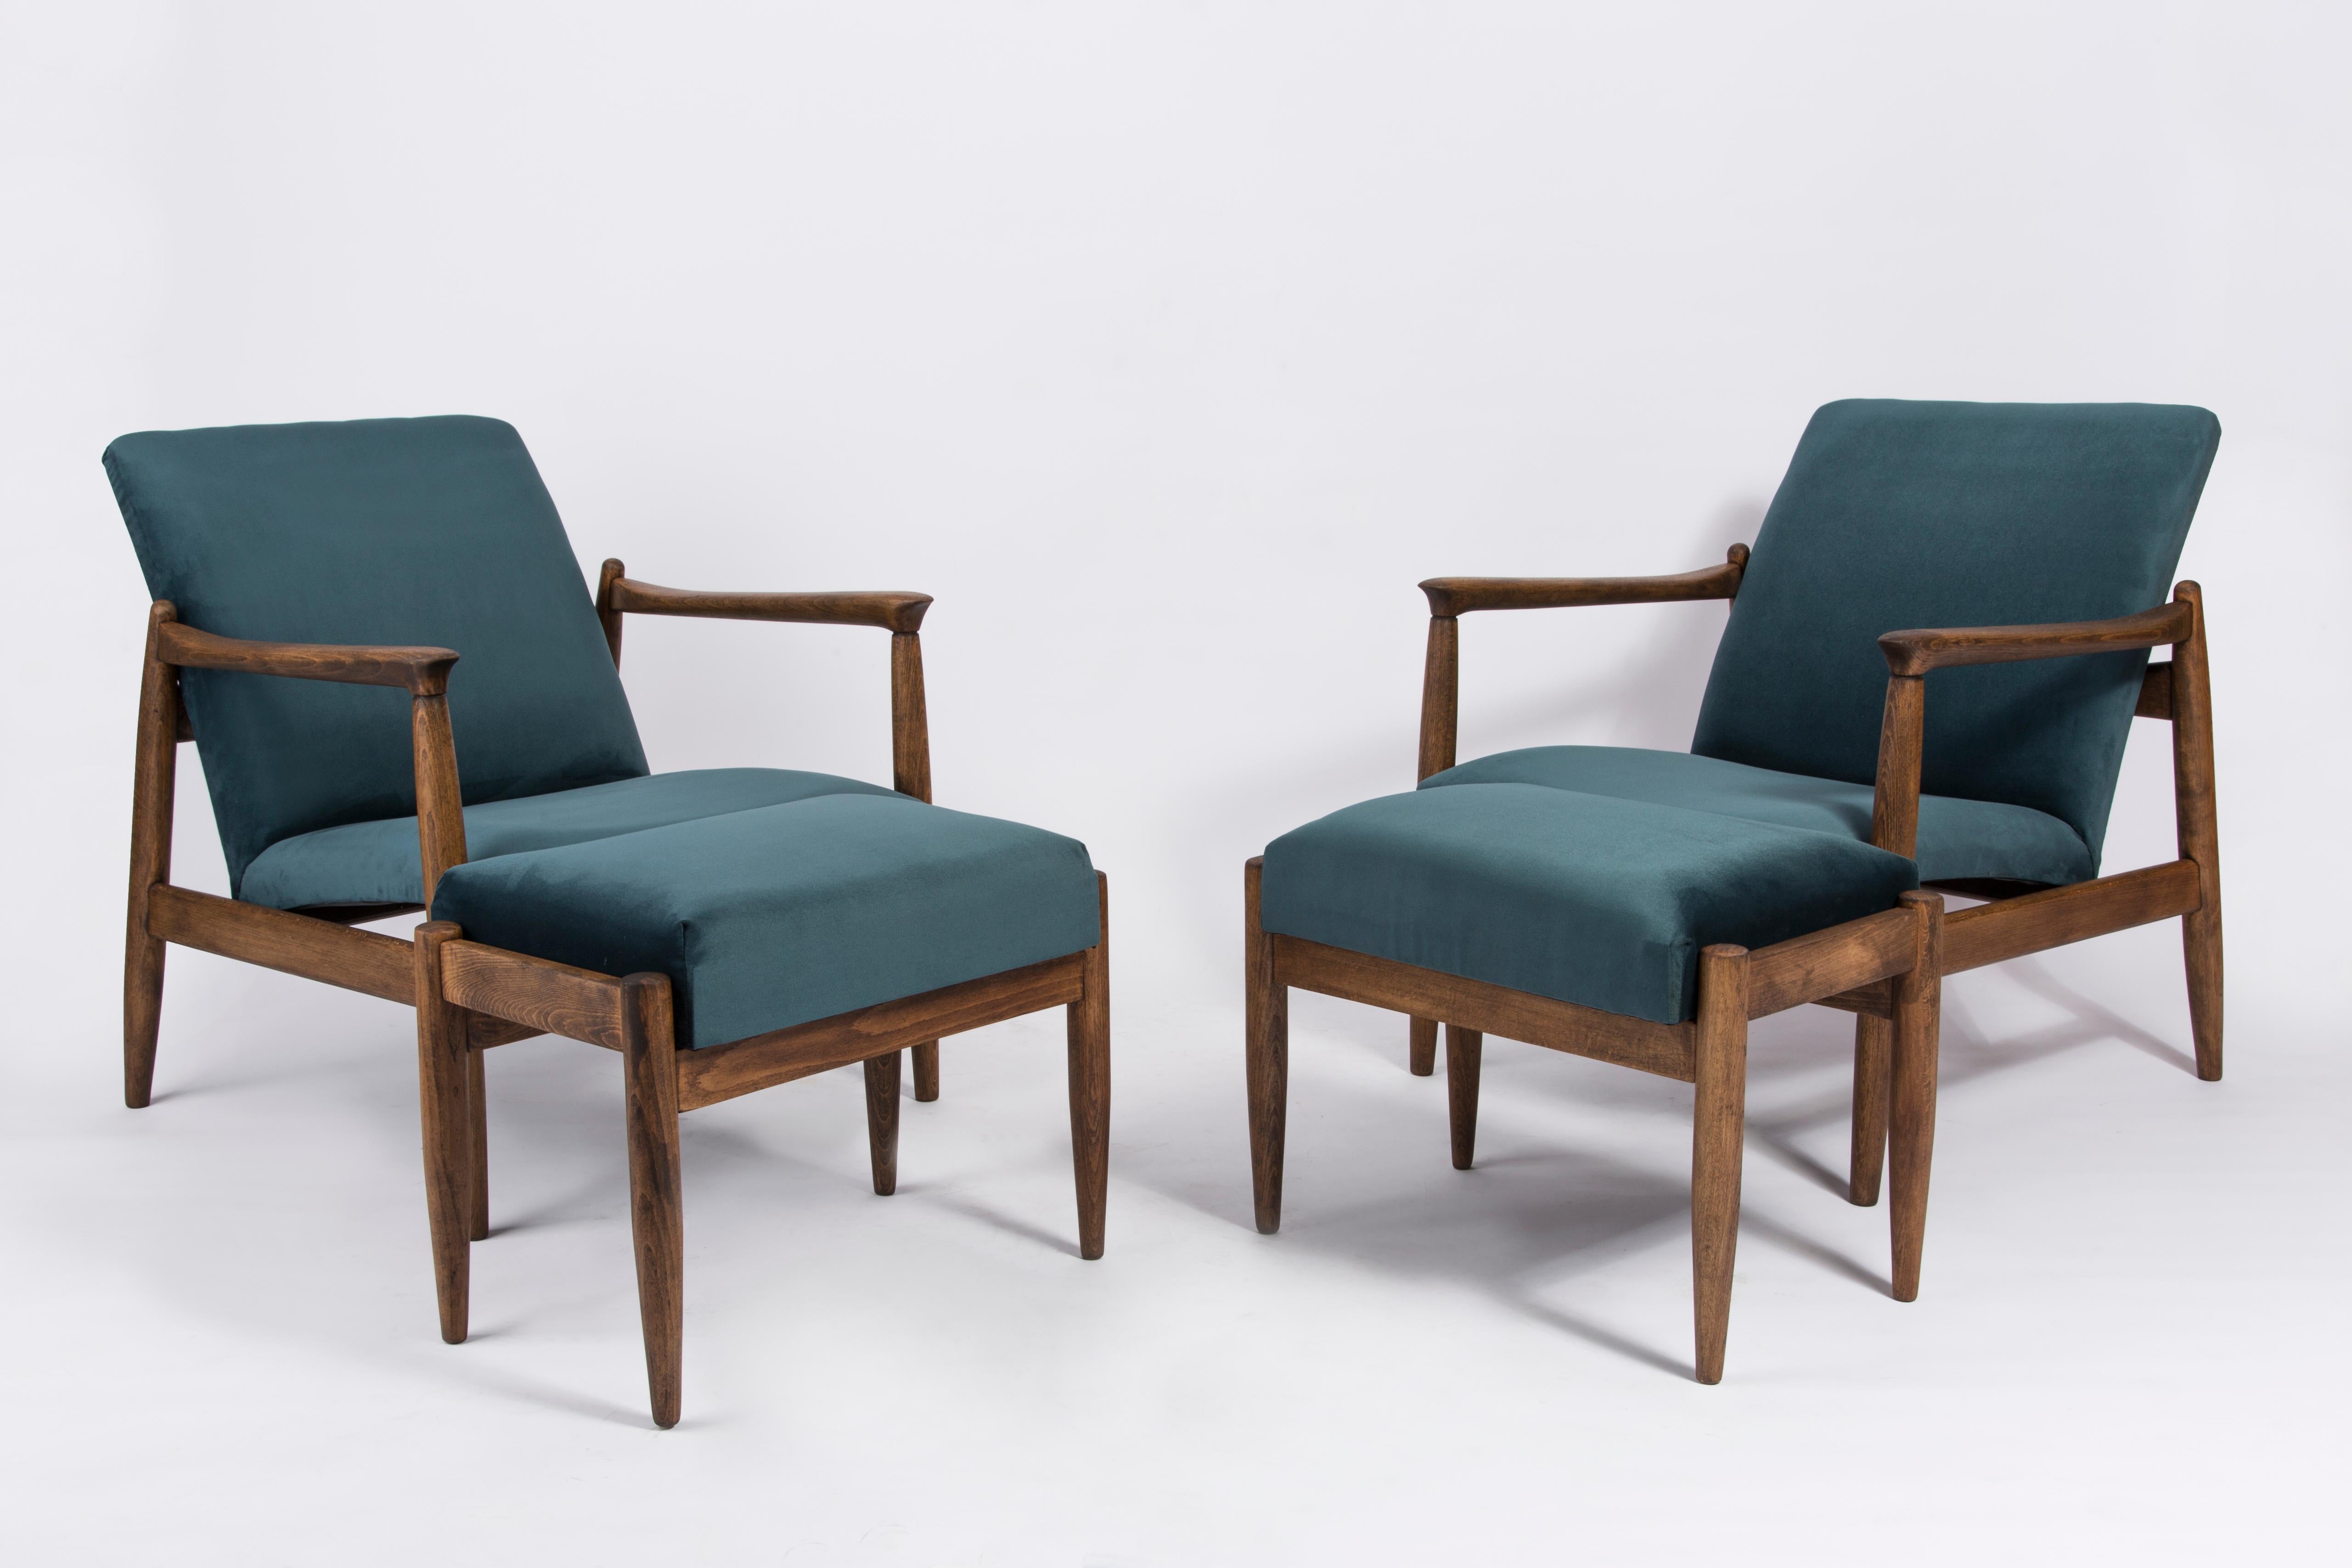 A pair of beautiful armchairs, designed by Edmund Homa. The armchairs were made in the 1960s in the Gosciecinska Furniture factory. They are made from solid beechwood. The GFM type armchair is regarded one of the best polish armchair design from the